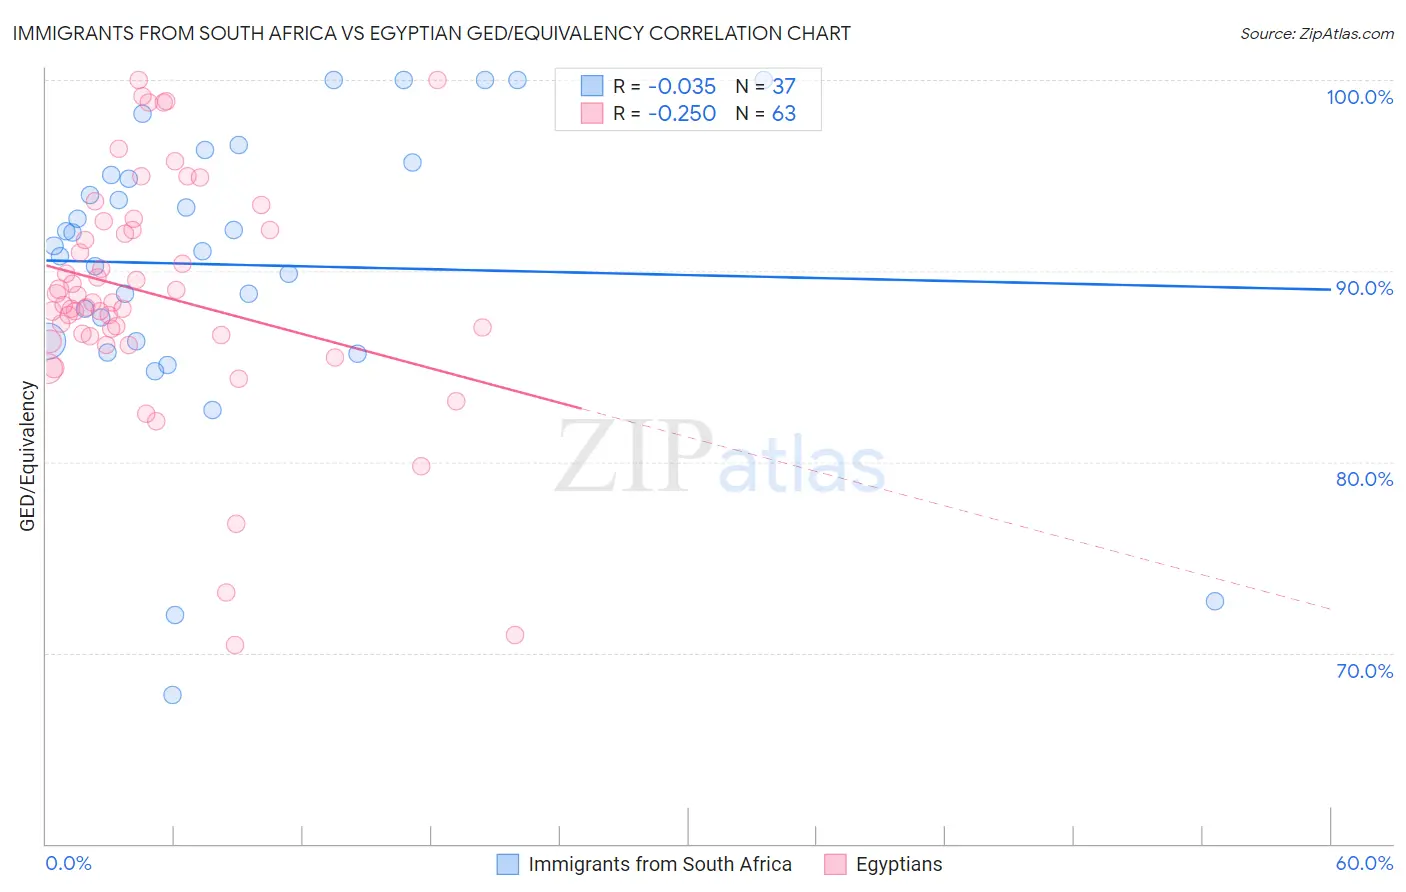 Immigrants from South Africa vs Egyptian GED/Equivalency